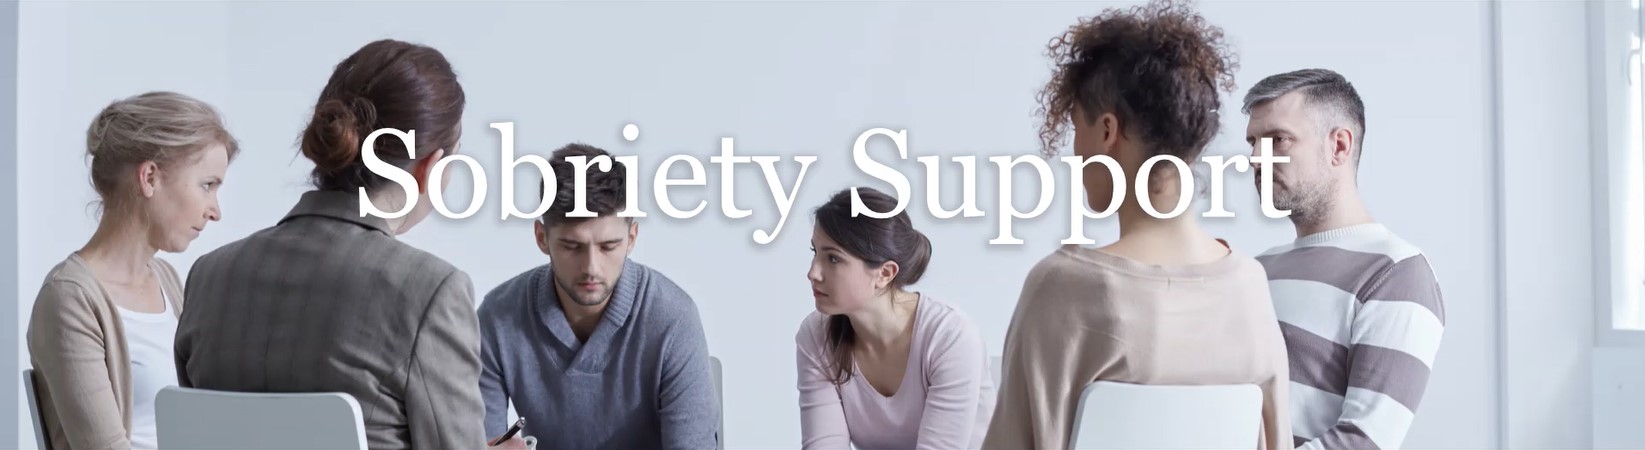 Sobriety Support group